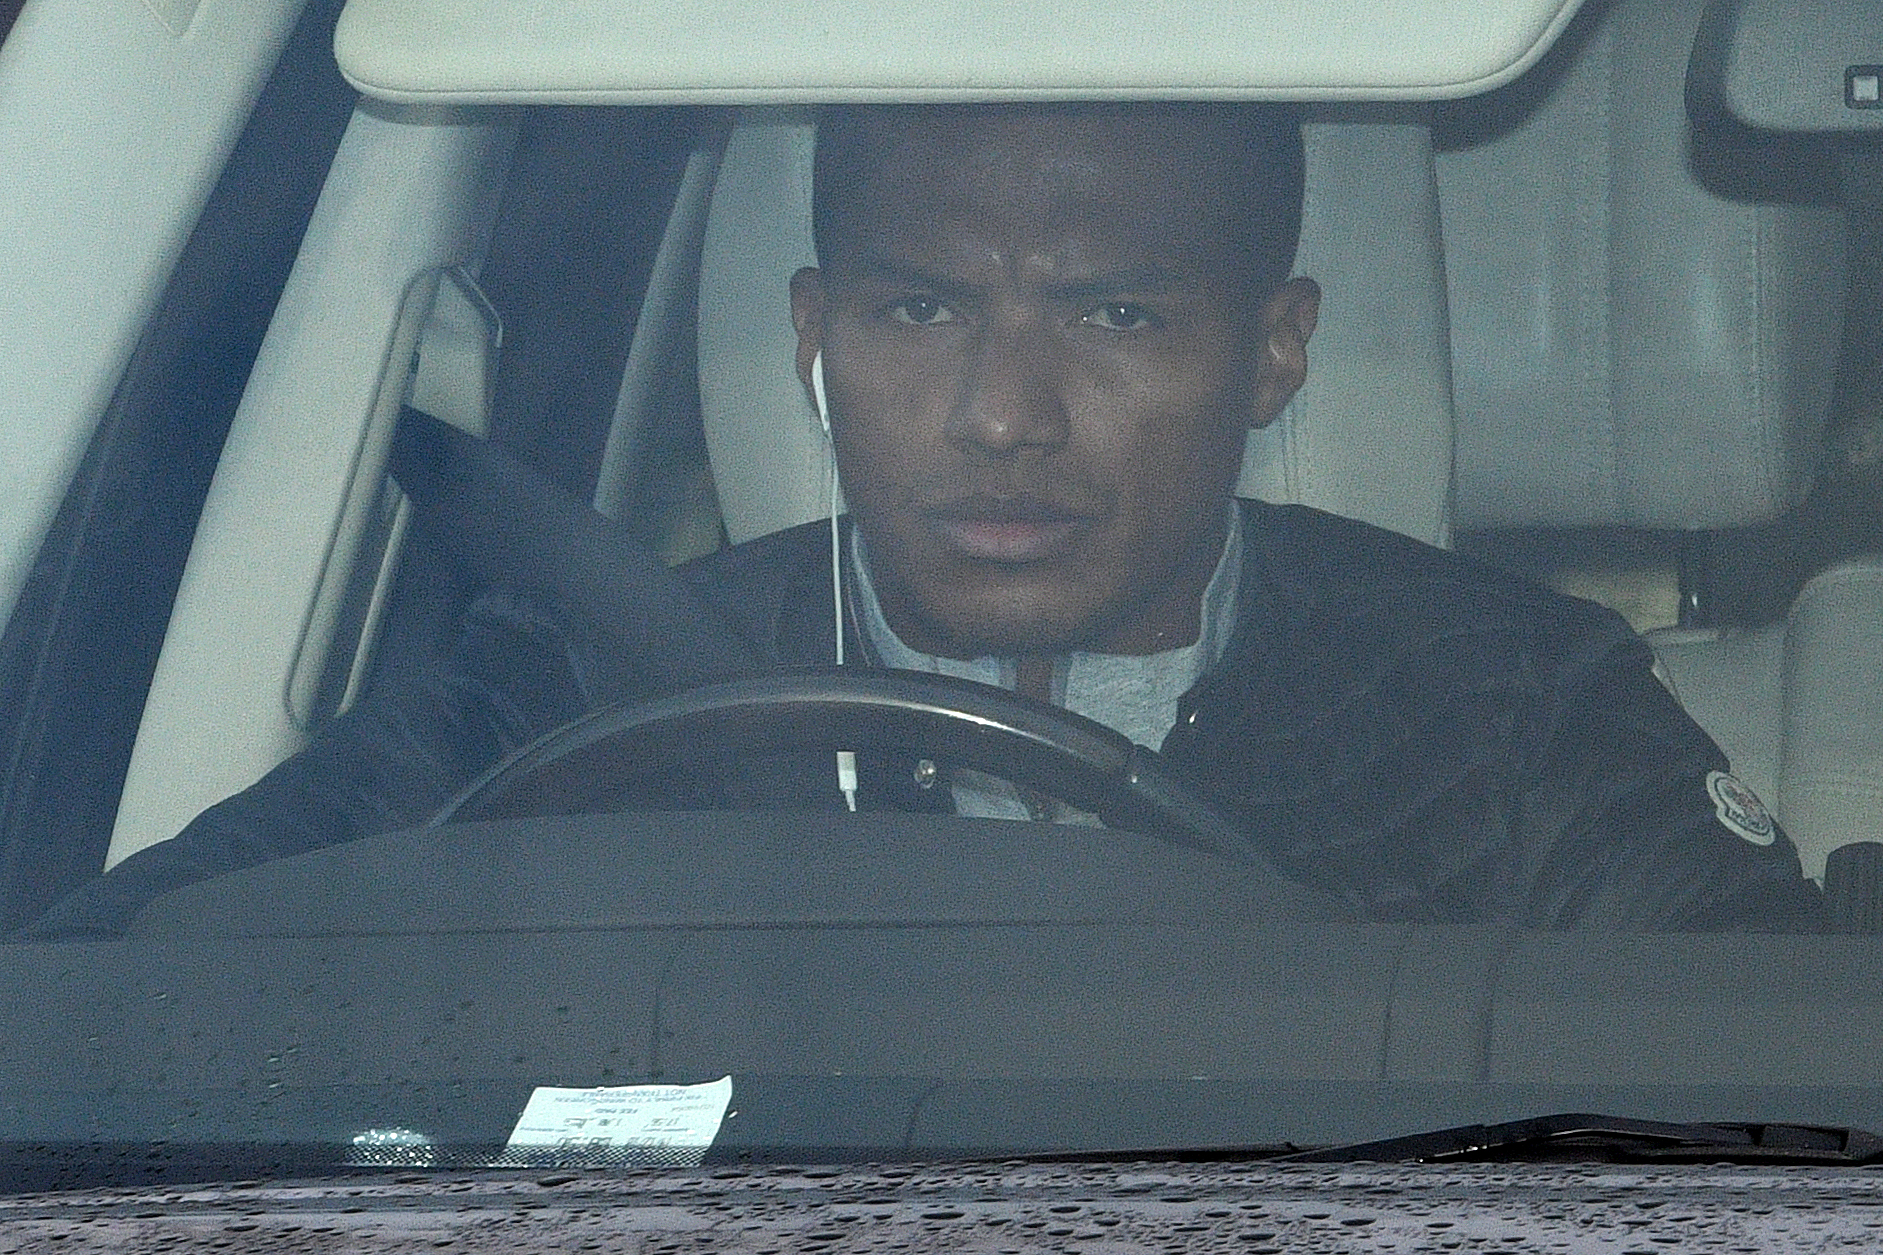 Manchester United's Ecuadorian midfielder Antonio Valencia arrives at the club's Carrington Training complex in Manchester, north west England on December 20, 2018. - Ole Gunnar Solskjaer was Wednesday handed the daunting task of saving Manchester United's season after the disastrous final few months of Jose Mourinho's reign. (Photo by Oli SCARFF / AFP)        (Photo credit should read OLI SCARFF/AFP/Getty Images)